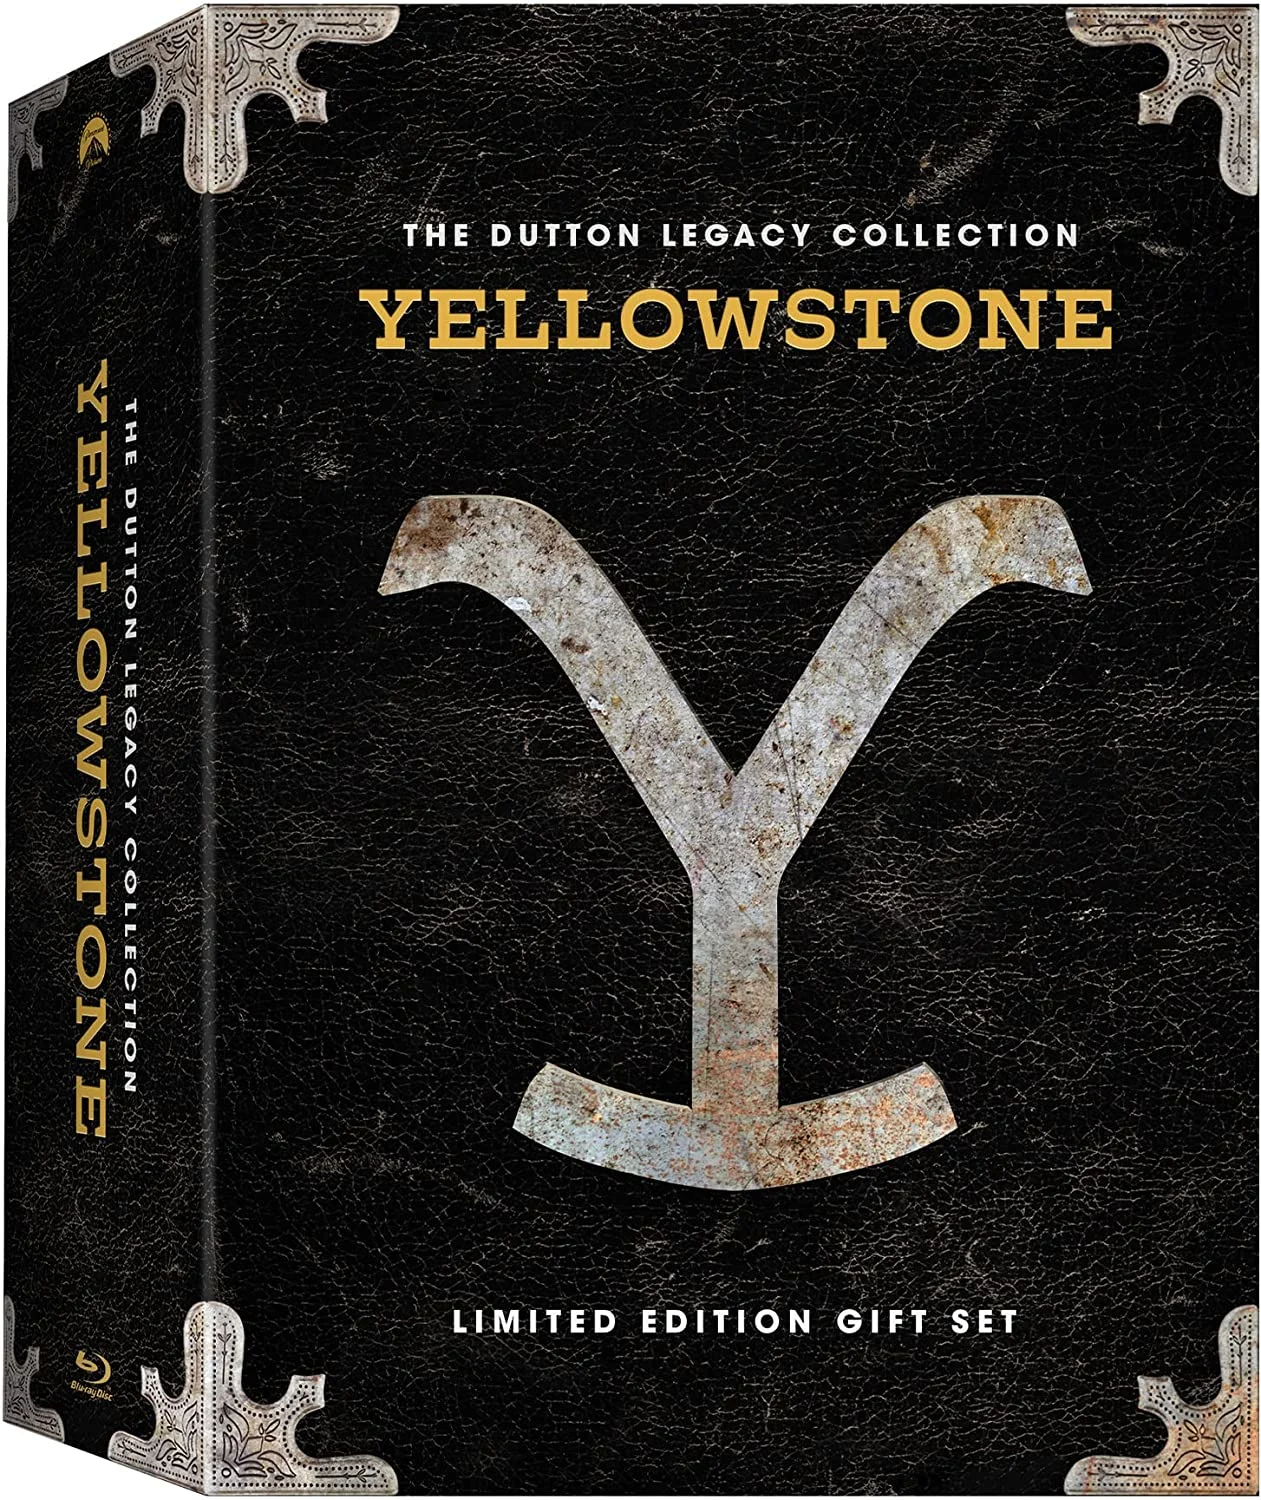 Yellowstone: The Dutton Legacy Collection (Blu-ray)